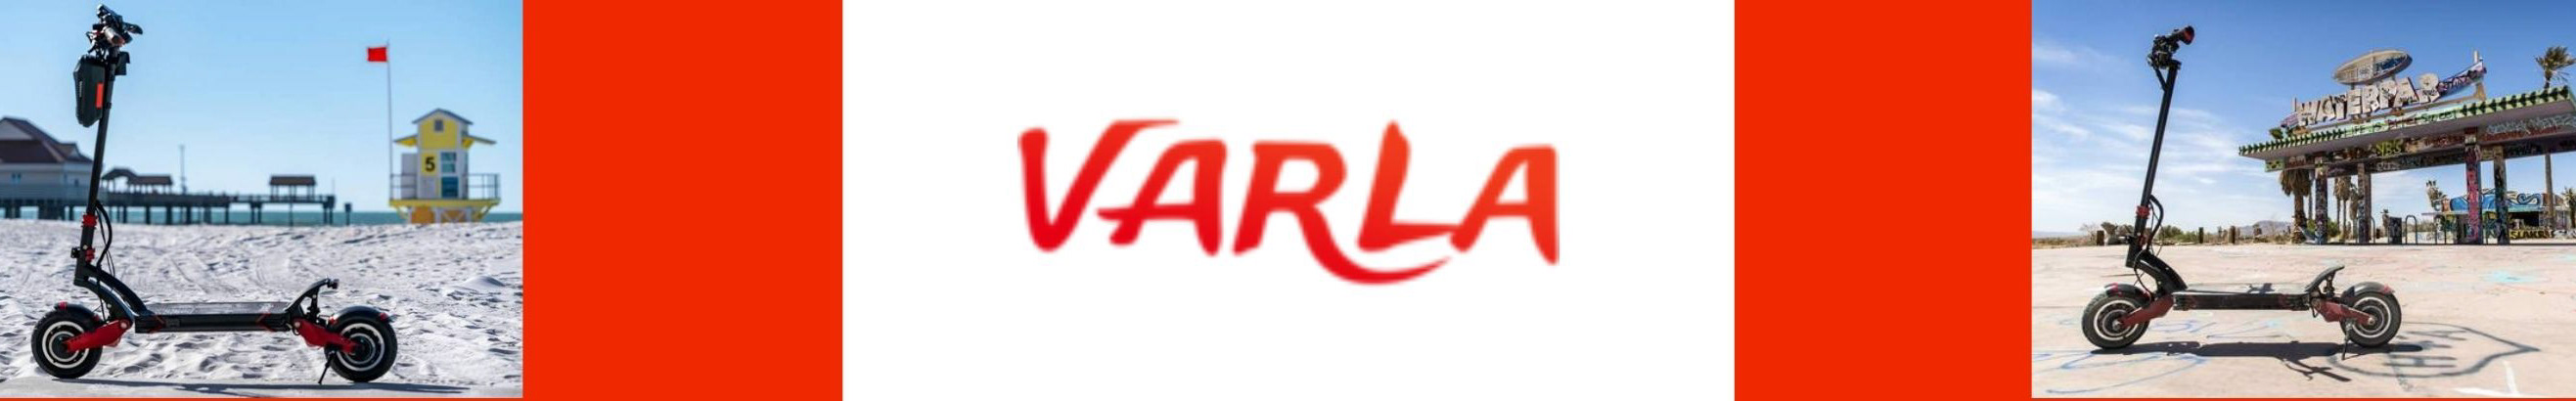 Varla Scooters profilbanner